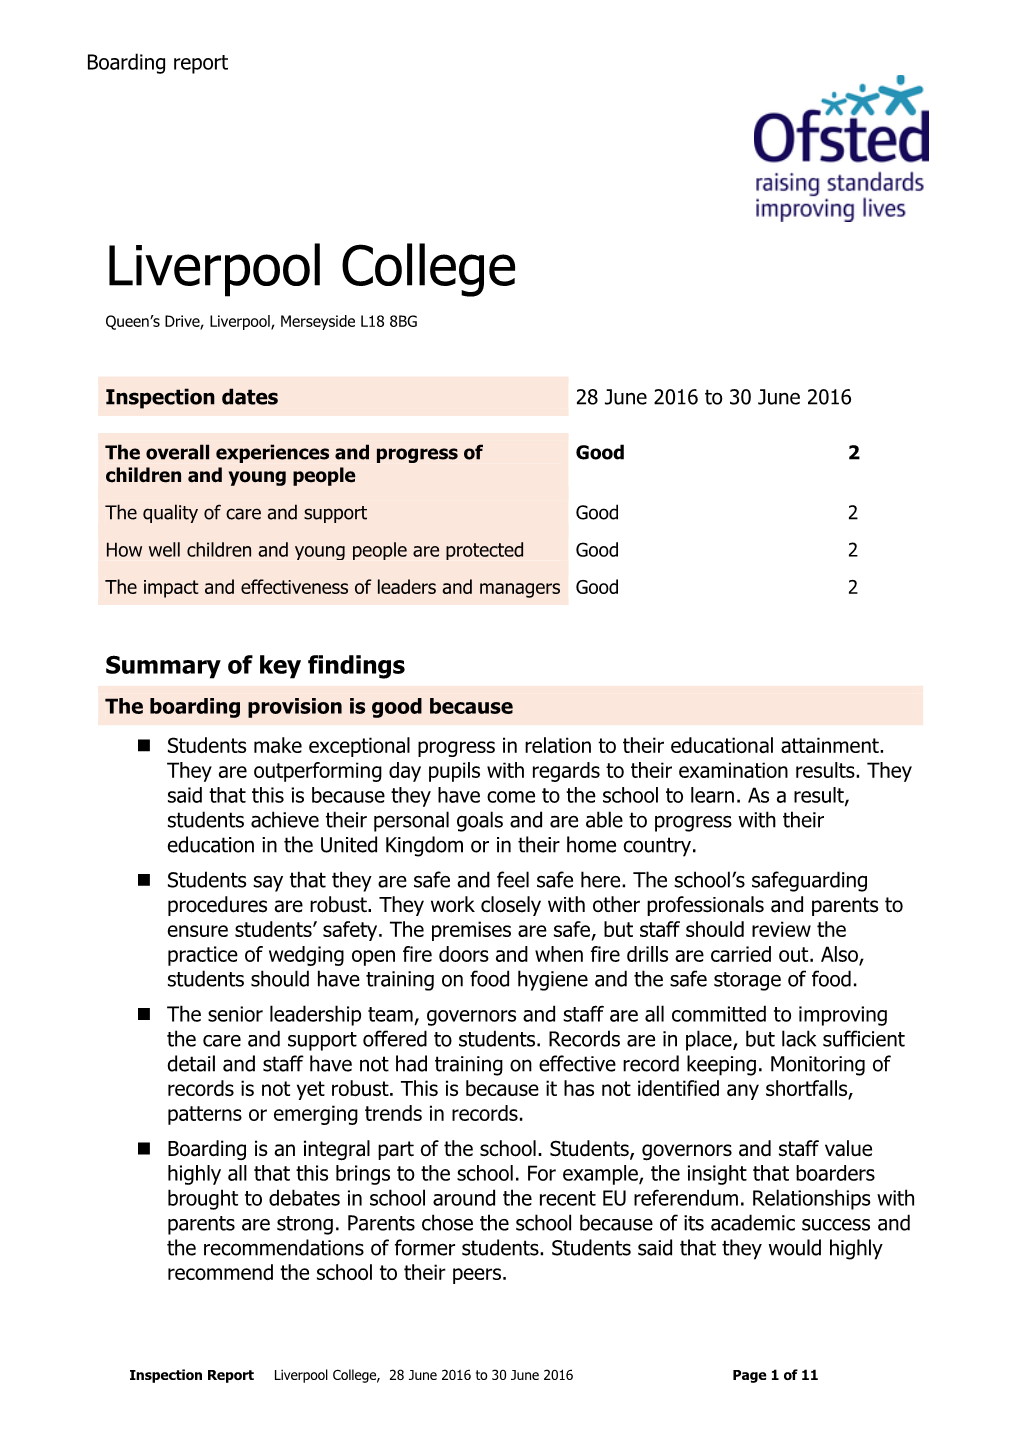 Ofsted Boarding Report for Liverpool College (June 2016)